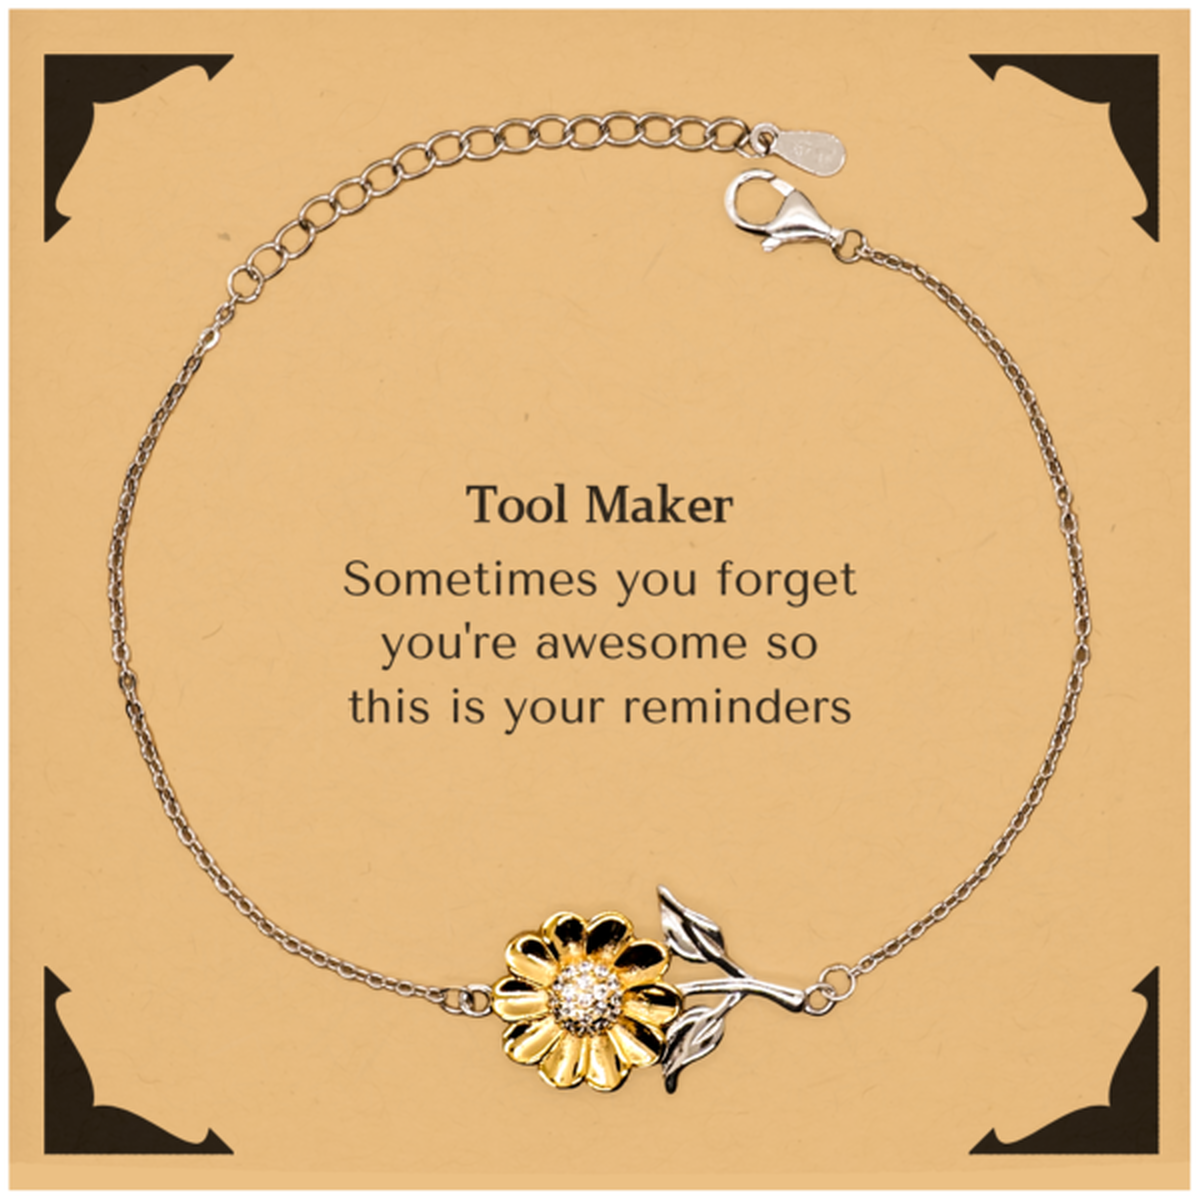 Sentimental Tool Maker Sunflower Bracelet, Tool Maker Sometimes you forget you're awesome so this is your reminders, Graduation Christmas Birthday Gifts for Tool Maker, Men, Women, Coworkers